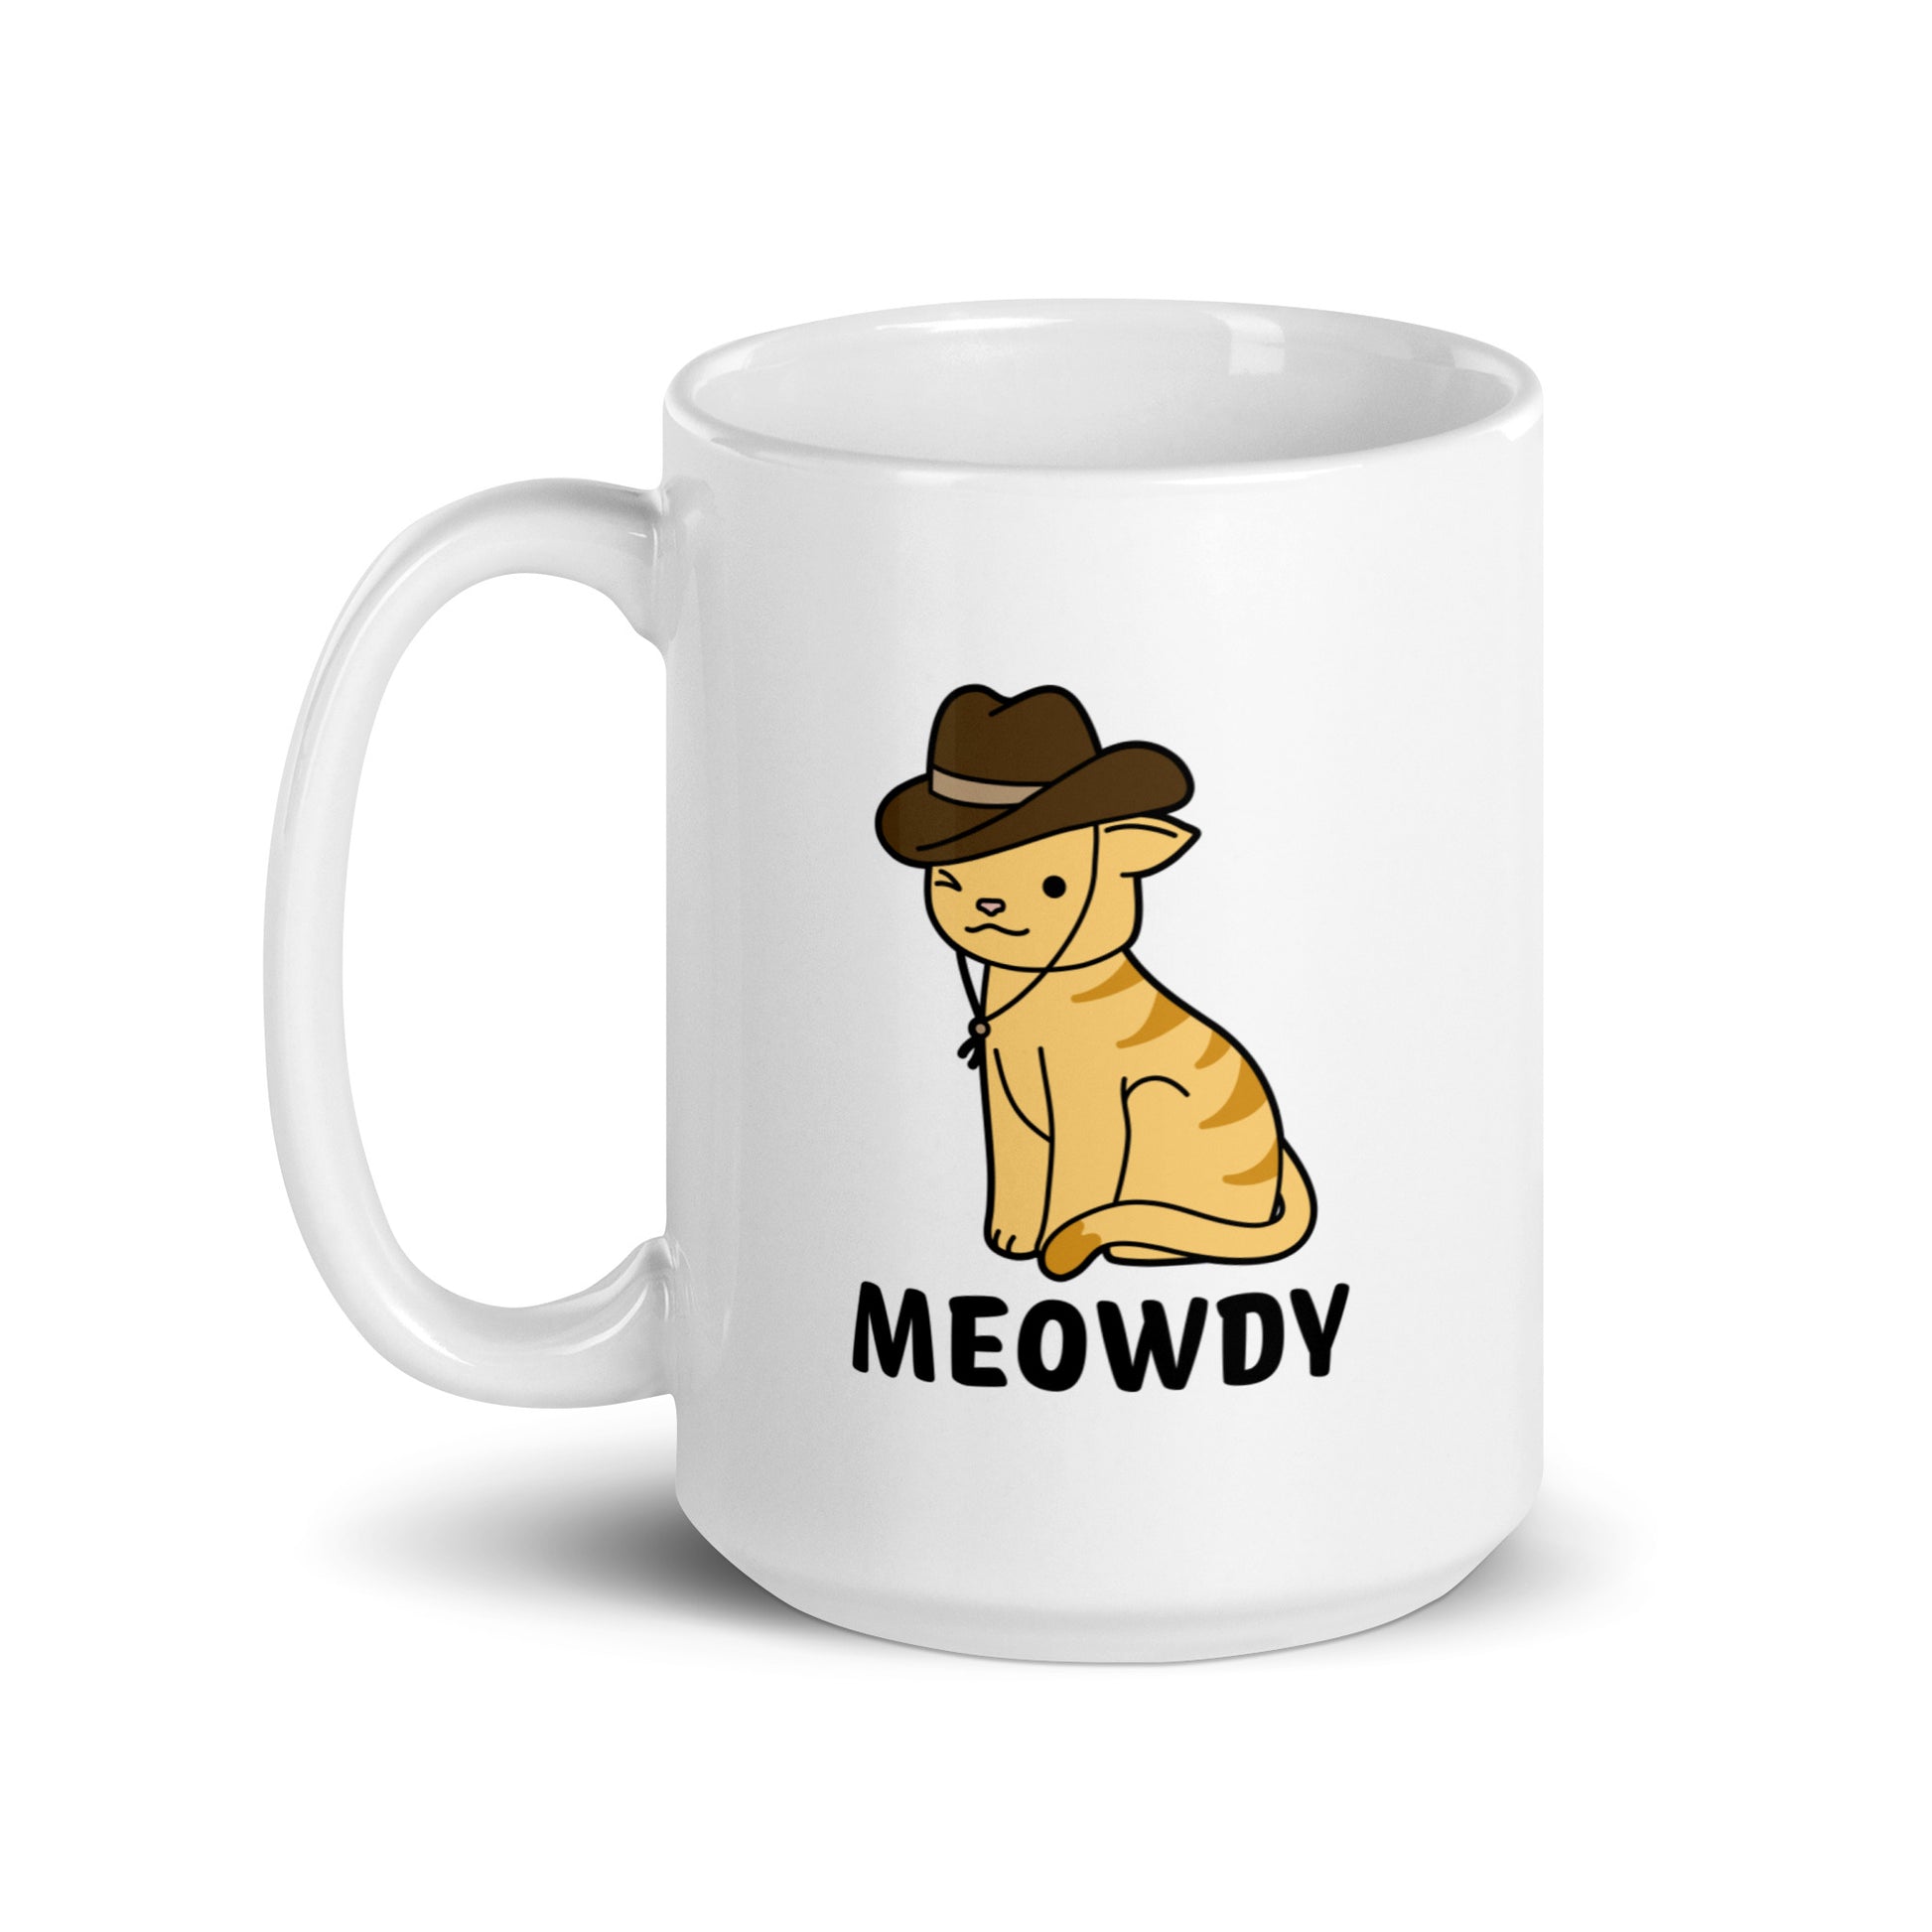 A white, 15 ounce ceramic coffee mug featuring an illustration of an orange striped cat wearing a cowboy hat. The cat is winking and smiling, and text beneath him reads "Meowdy"